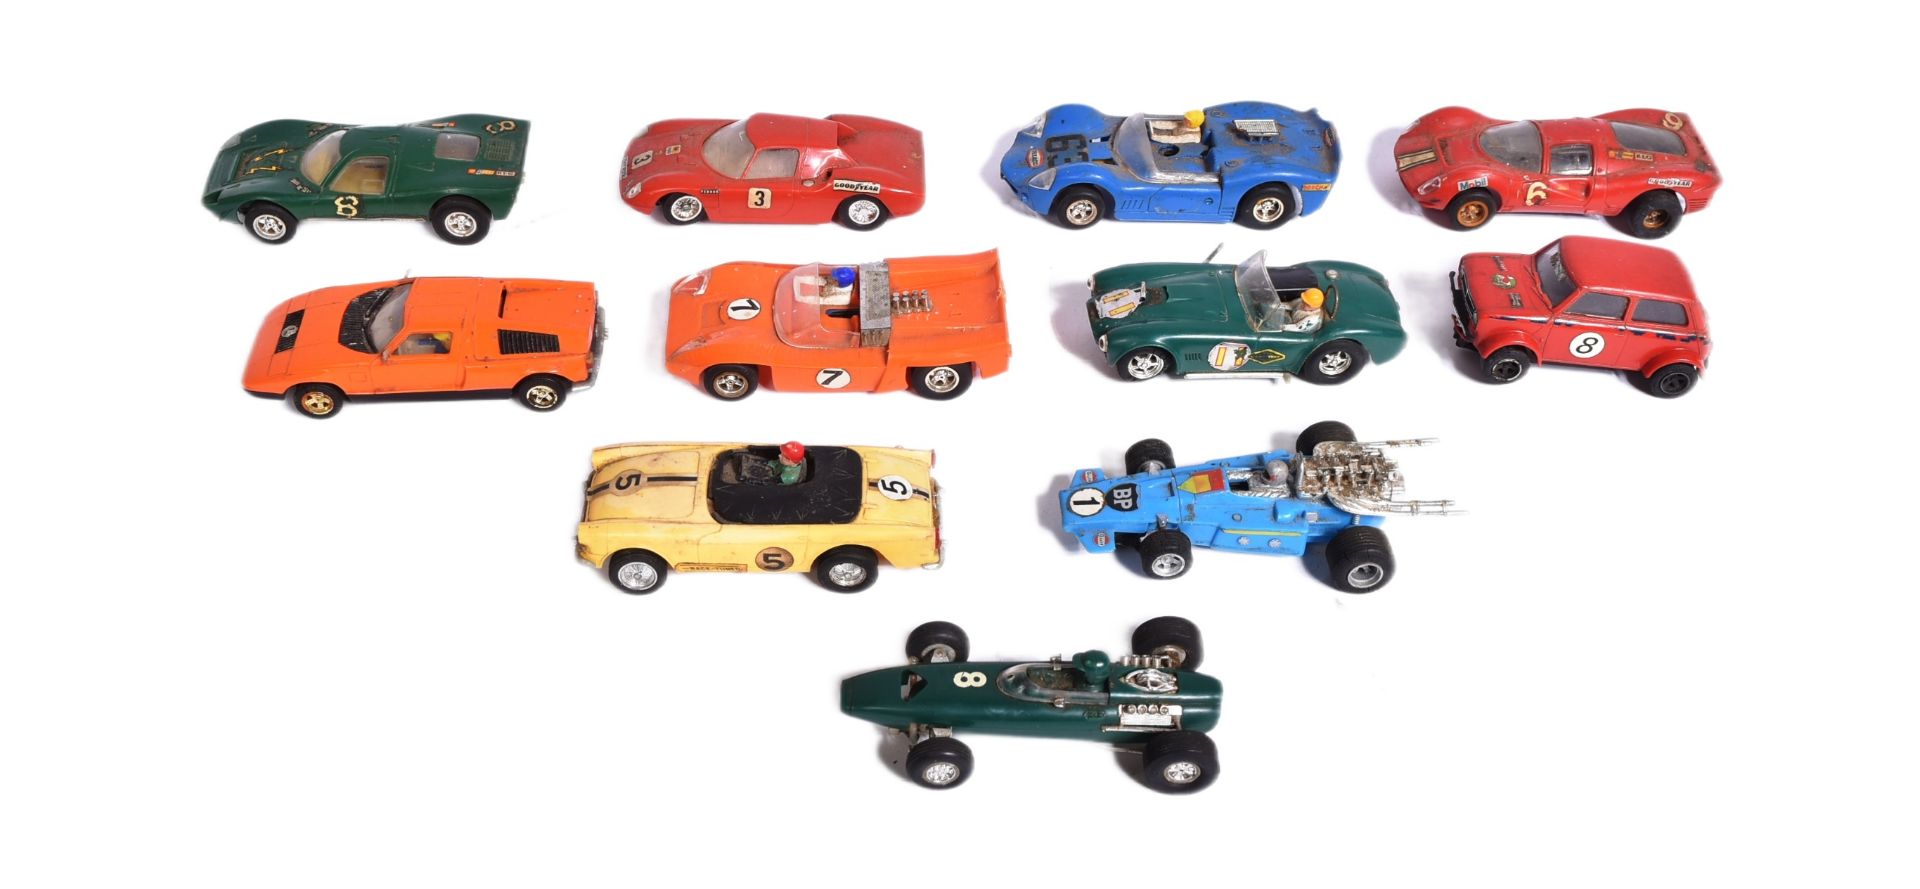 SCALEXTRIC - COLLECTION OF VINTAGE SCALEXTRIC SLOT CARS